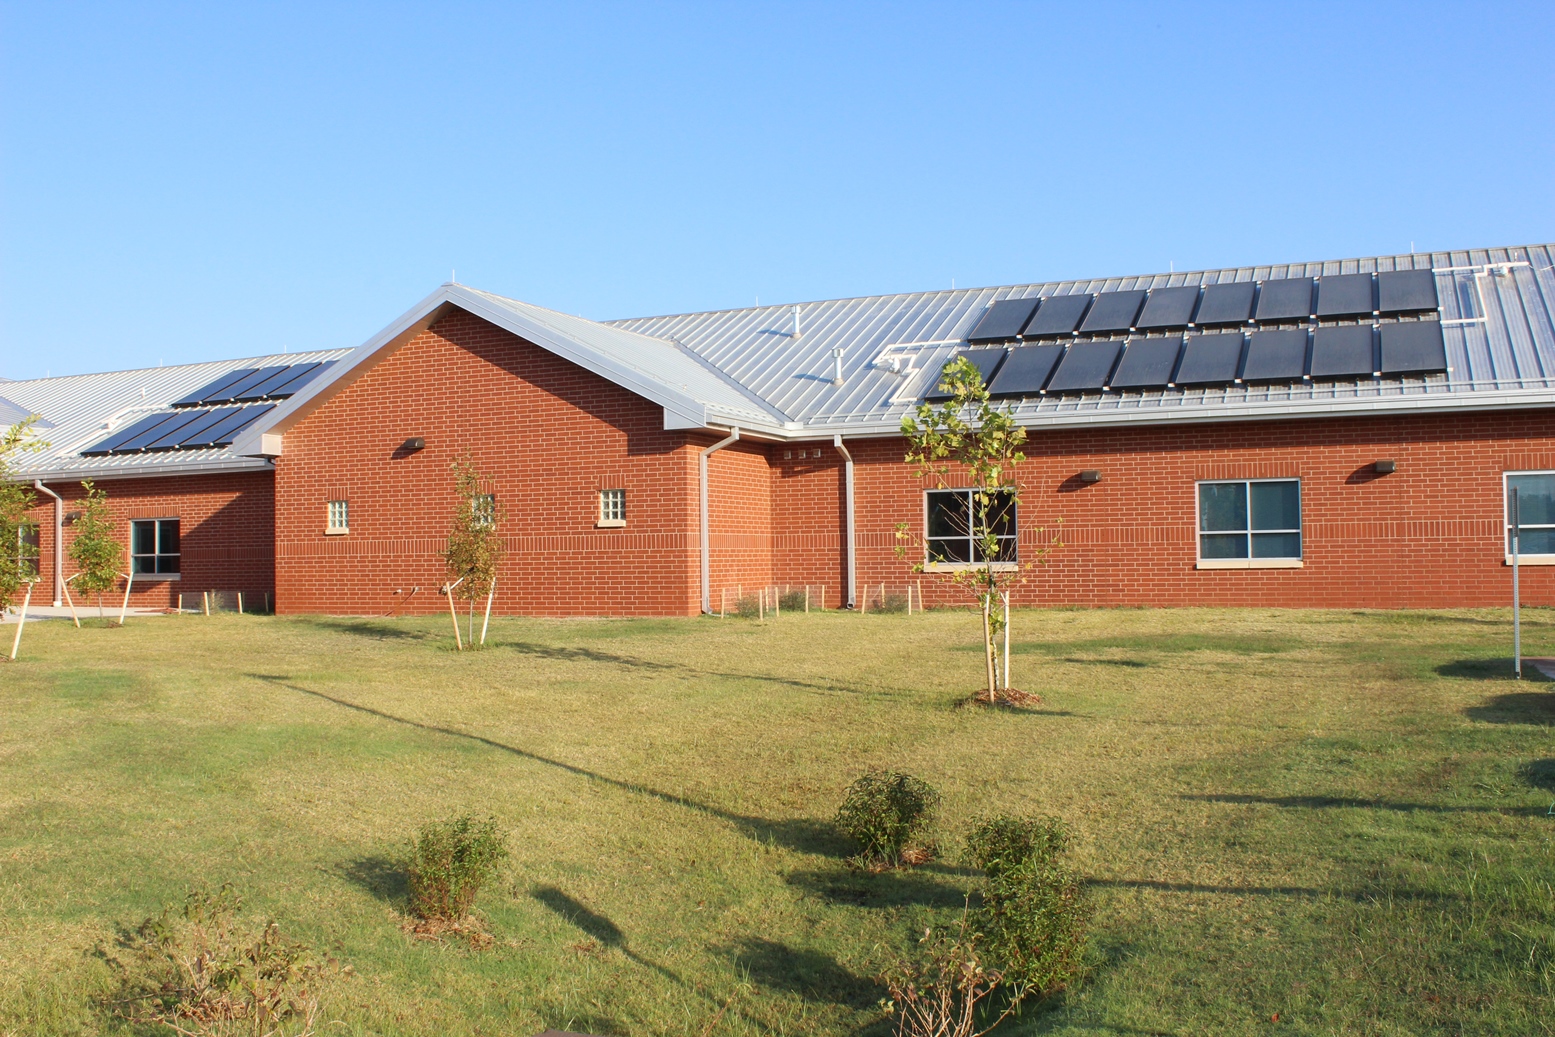 The LEED-certified dormitories feature energy-efficient solar panels to supply hot water to tenants.